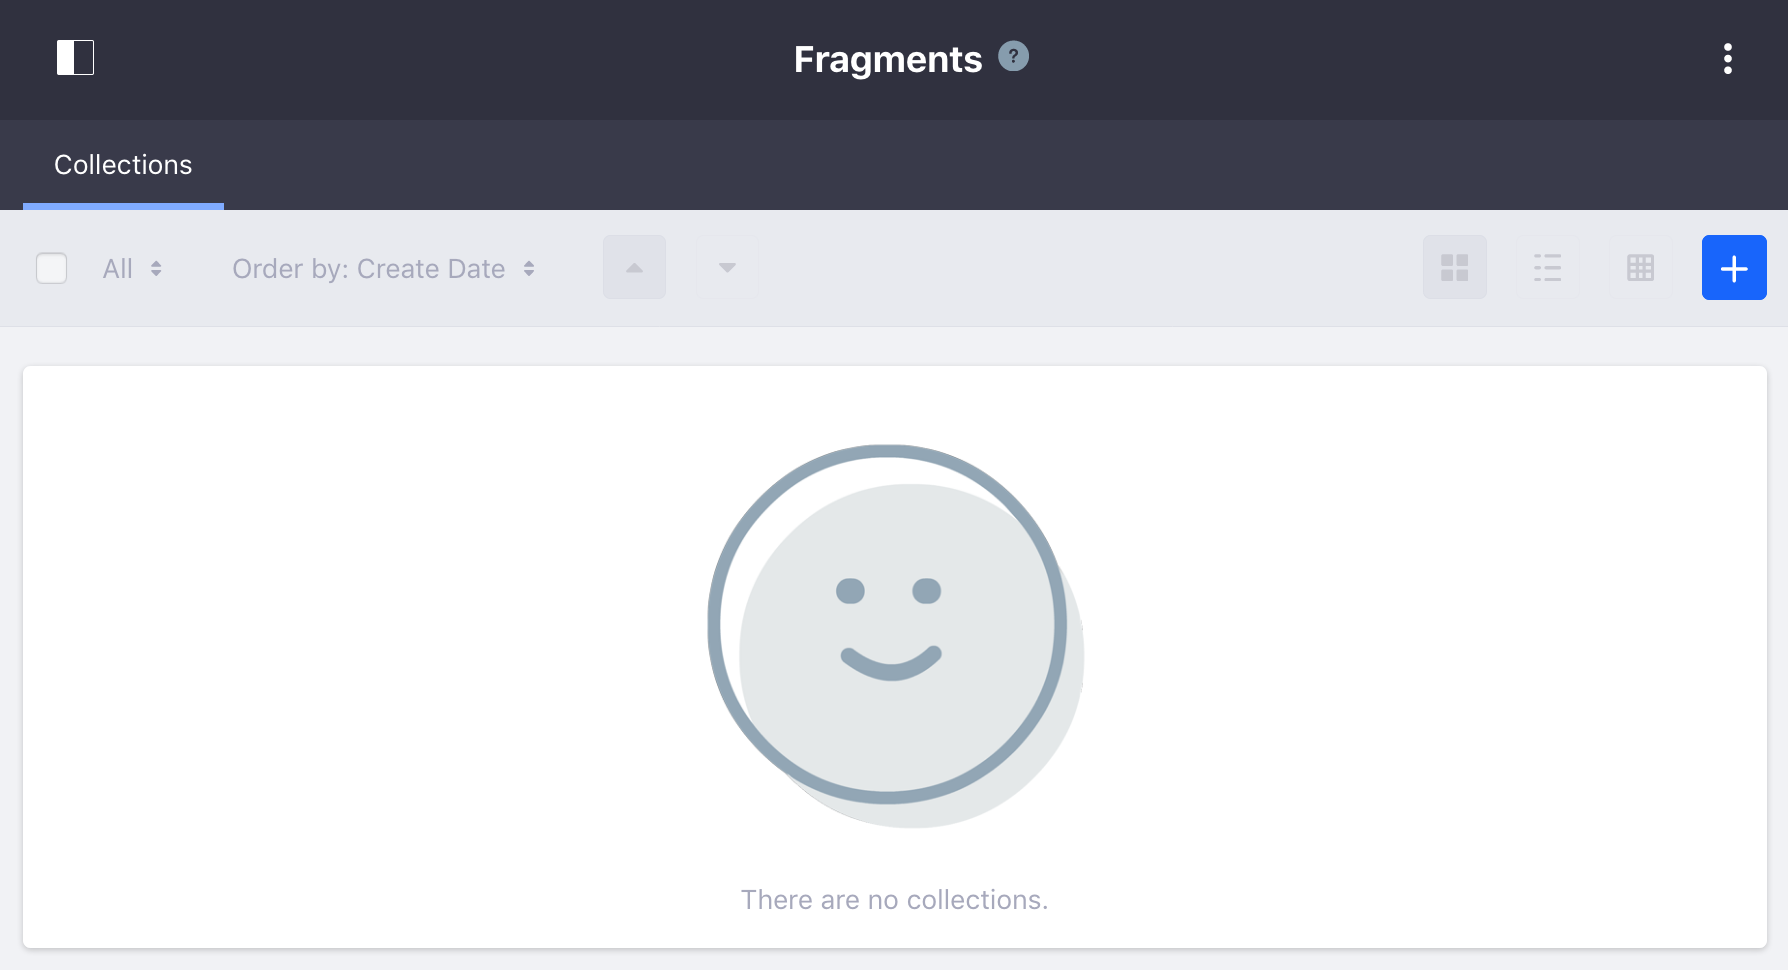 Figure 1: Here is the Page Fragments page with no Fragments or Collections created.